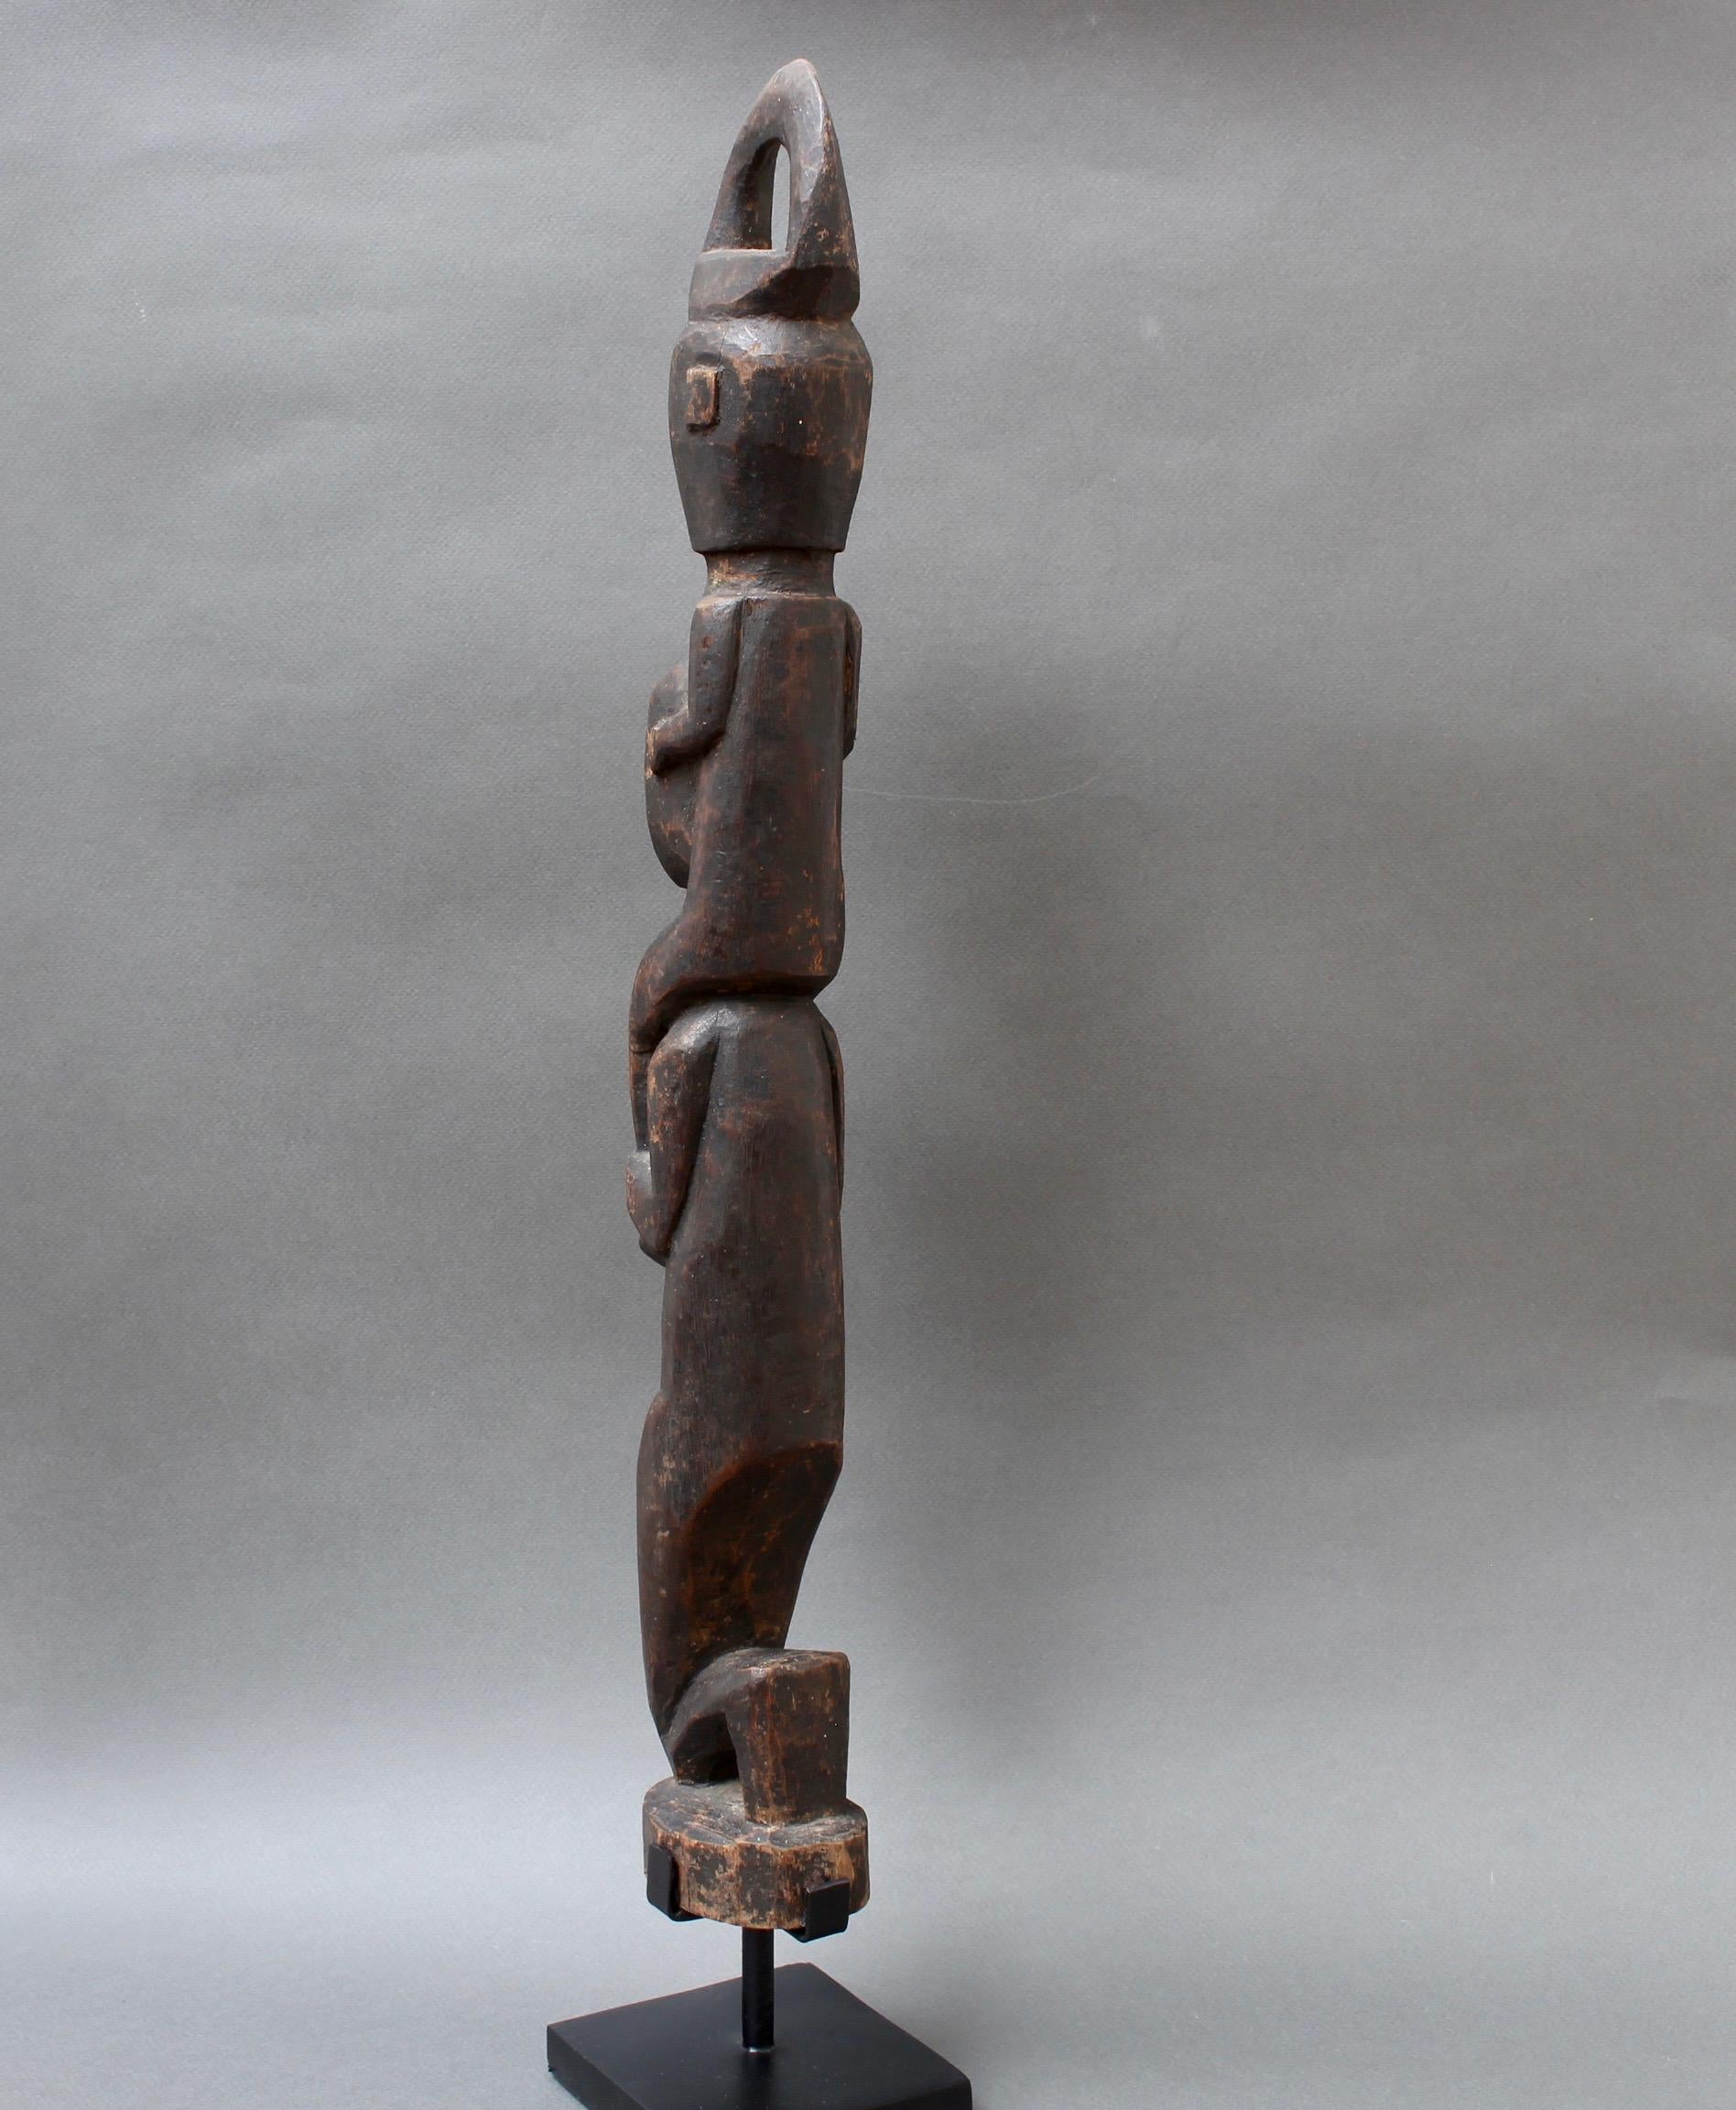 Tribal Wooden Sculpture of Totemic Figures from Timor Island, Indonesia, circa 1970s